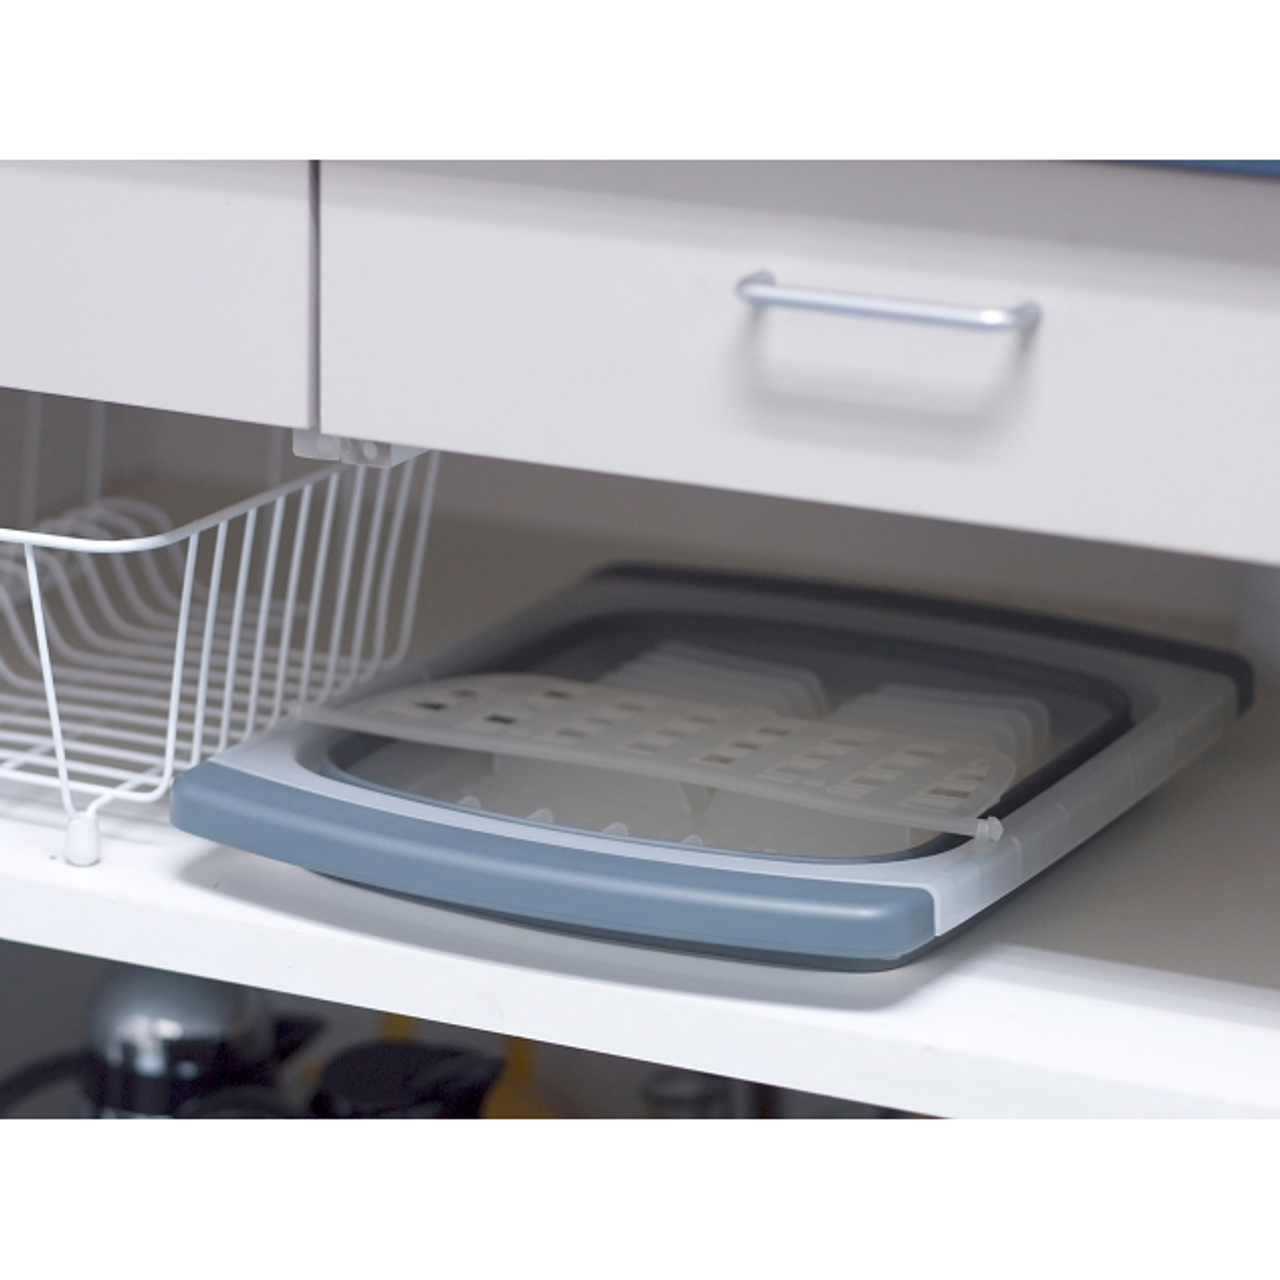 https://cdn11.bigcommerce.com/s-ympg1dfqkh/images/stencil/1280x1280/products/4813/31243/Collapsible-Over-the-Sink-Dish-Drainer__S_3__08371.1586314018.png?c=2